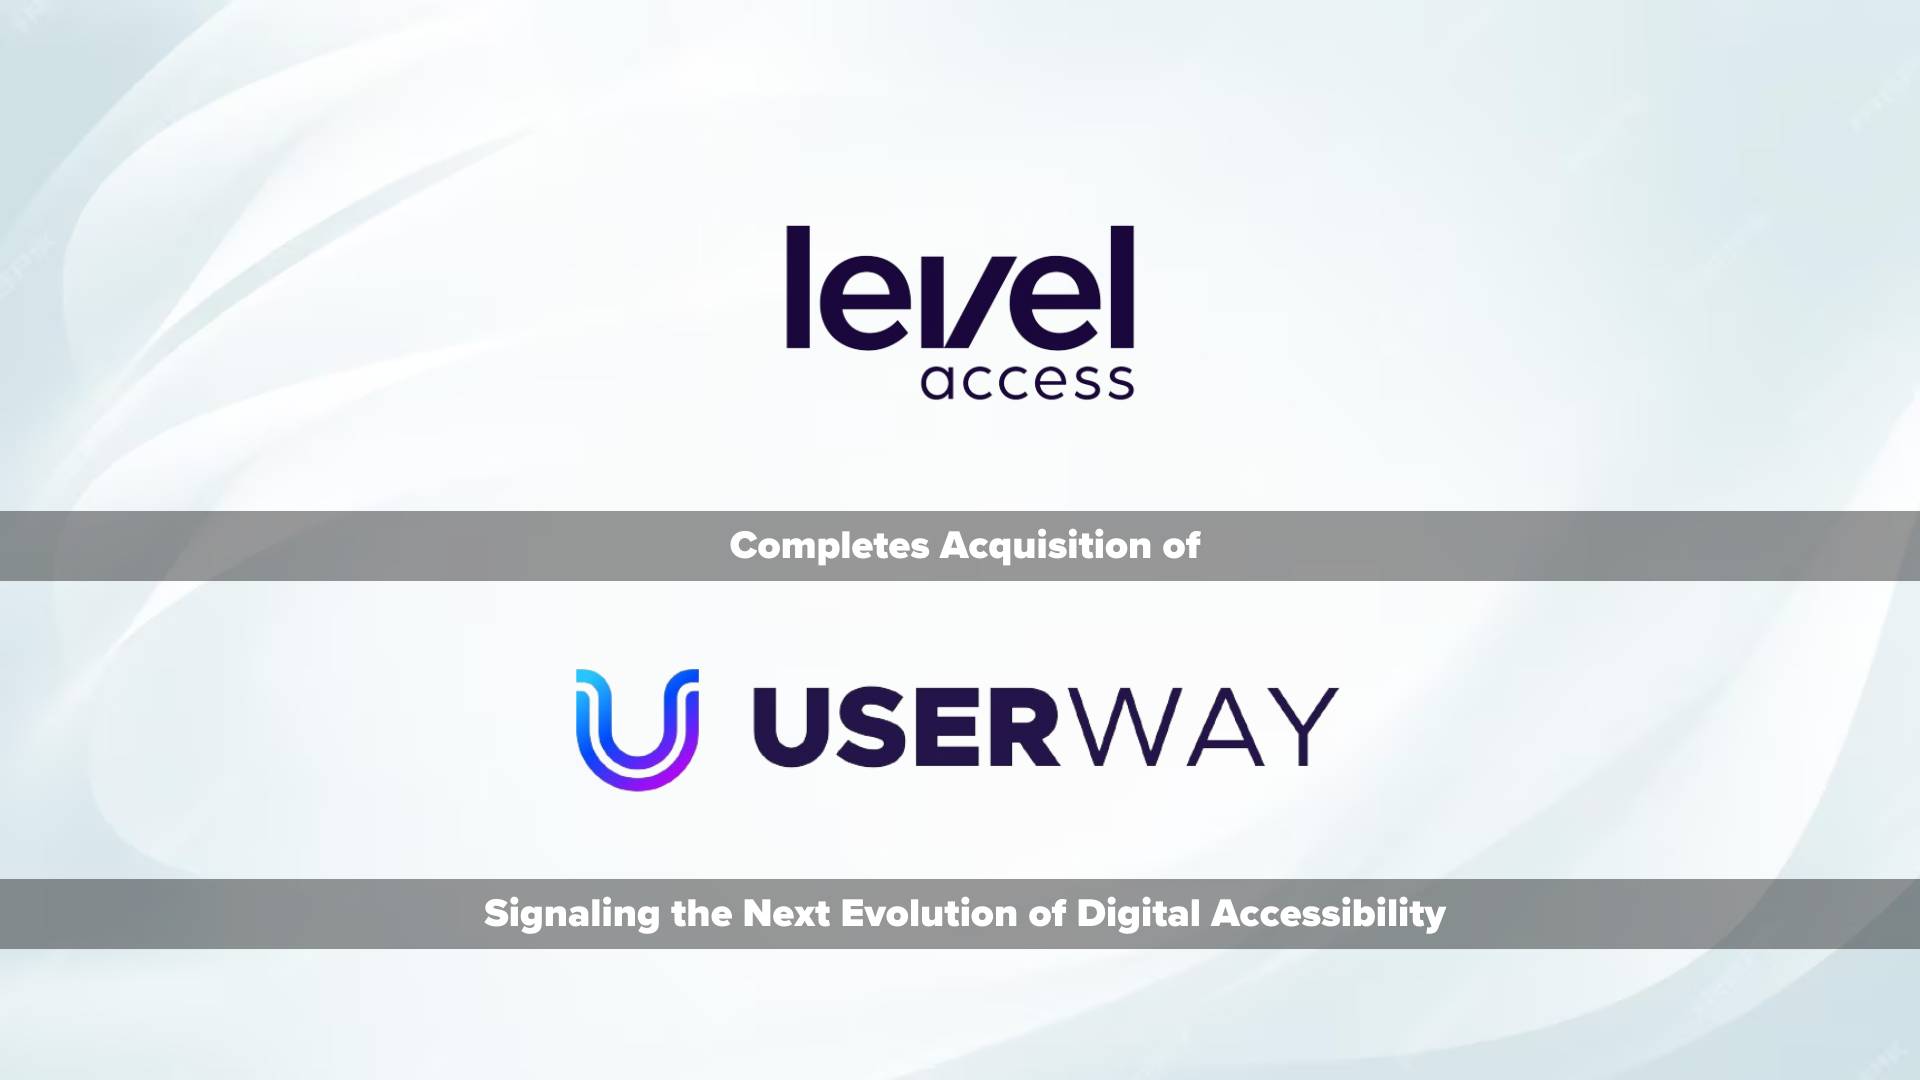 Level Access Completes Acquisition of UserWay, Signaling the Next Evolution of Digital Accessibility